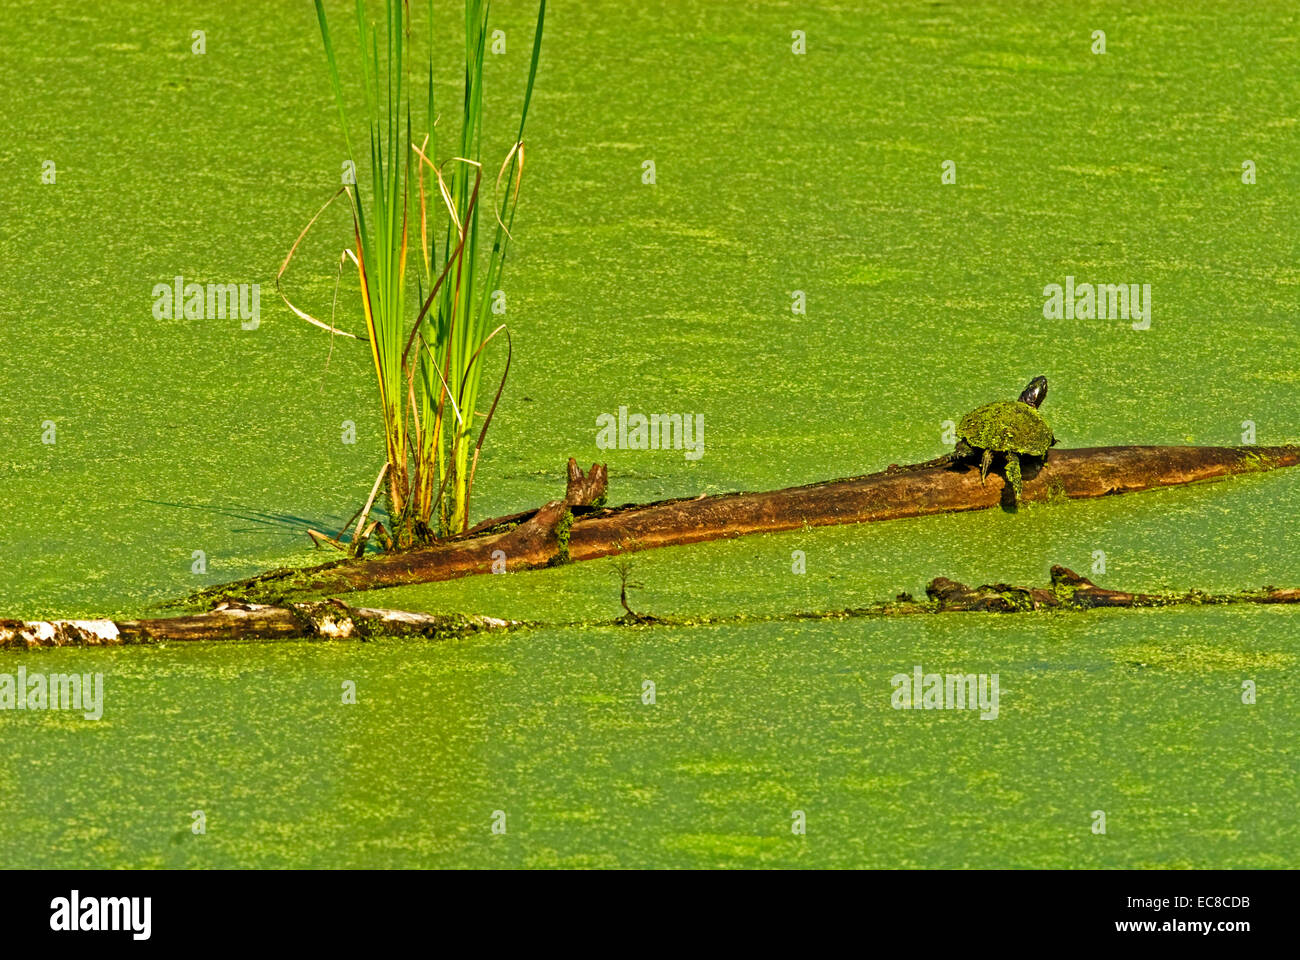 Turtle on a log in a marshland pond. Stock Photo